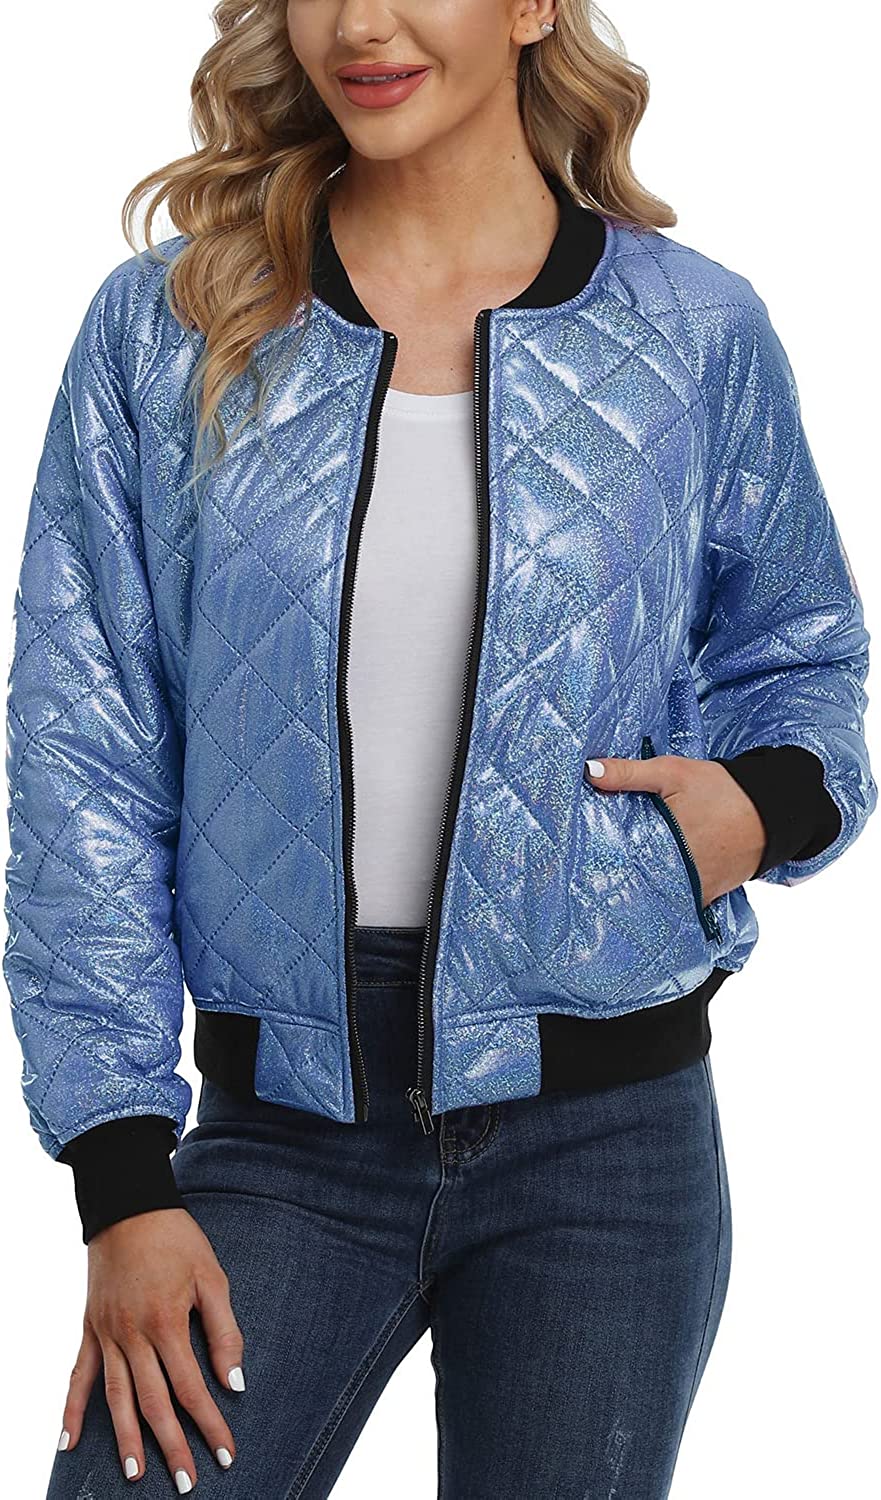 andy & natalie Women's Quilted Jacket Long Sleeve Zip up Raglan Bomber  Jacket wi